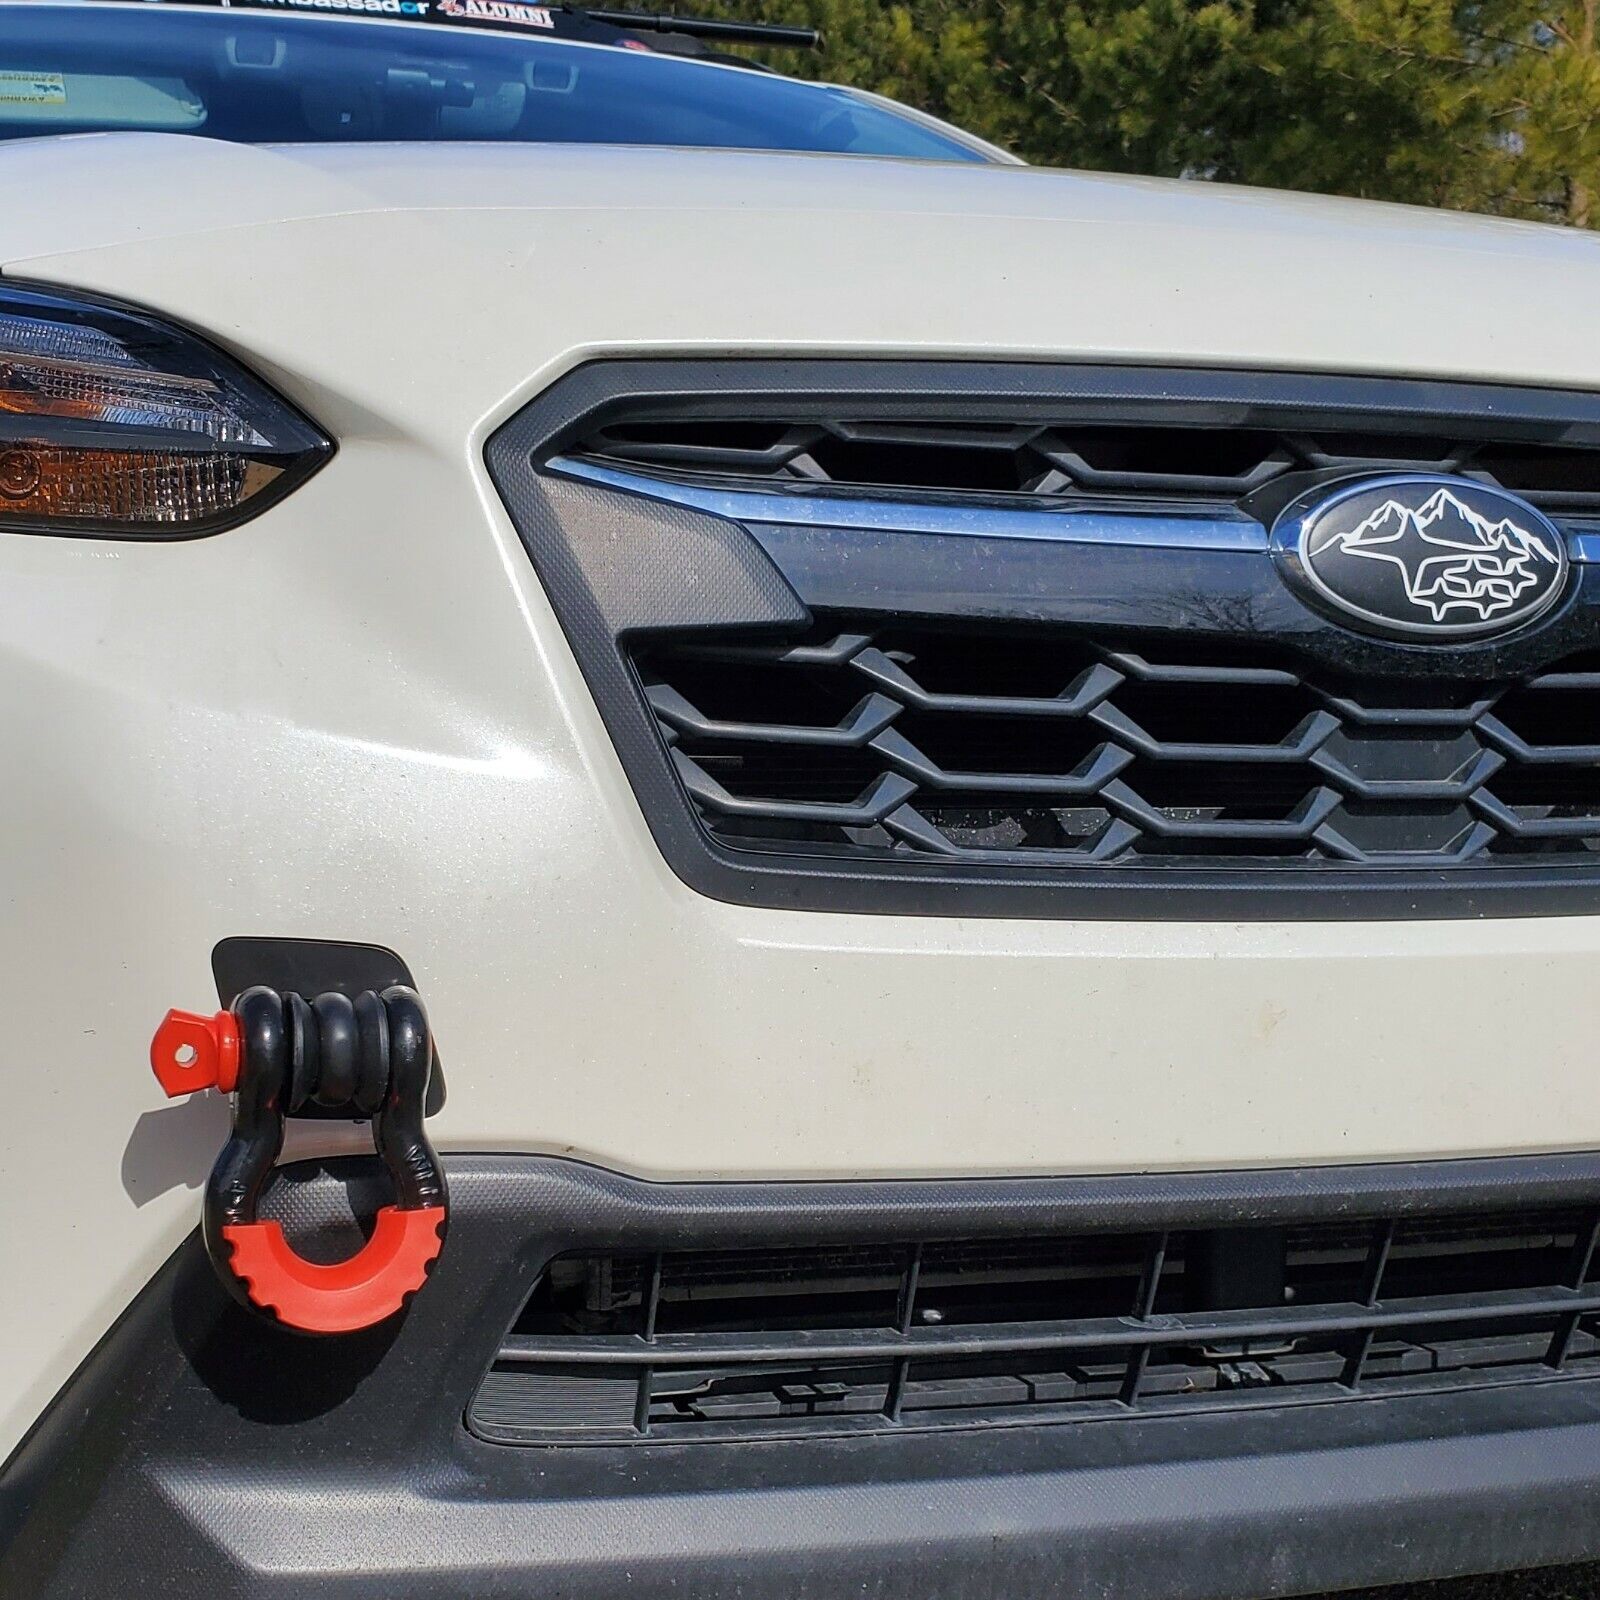 Subaru Official Dipped Tow Hook with Shackle and Guard